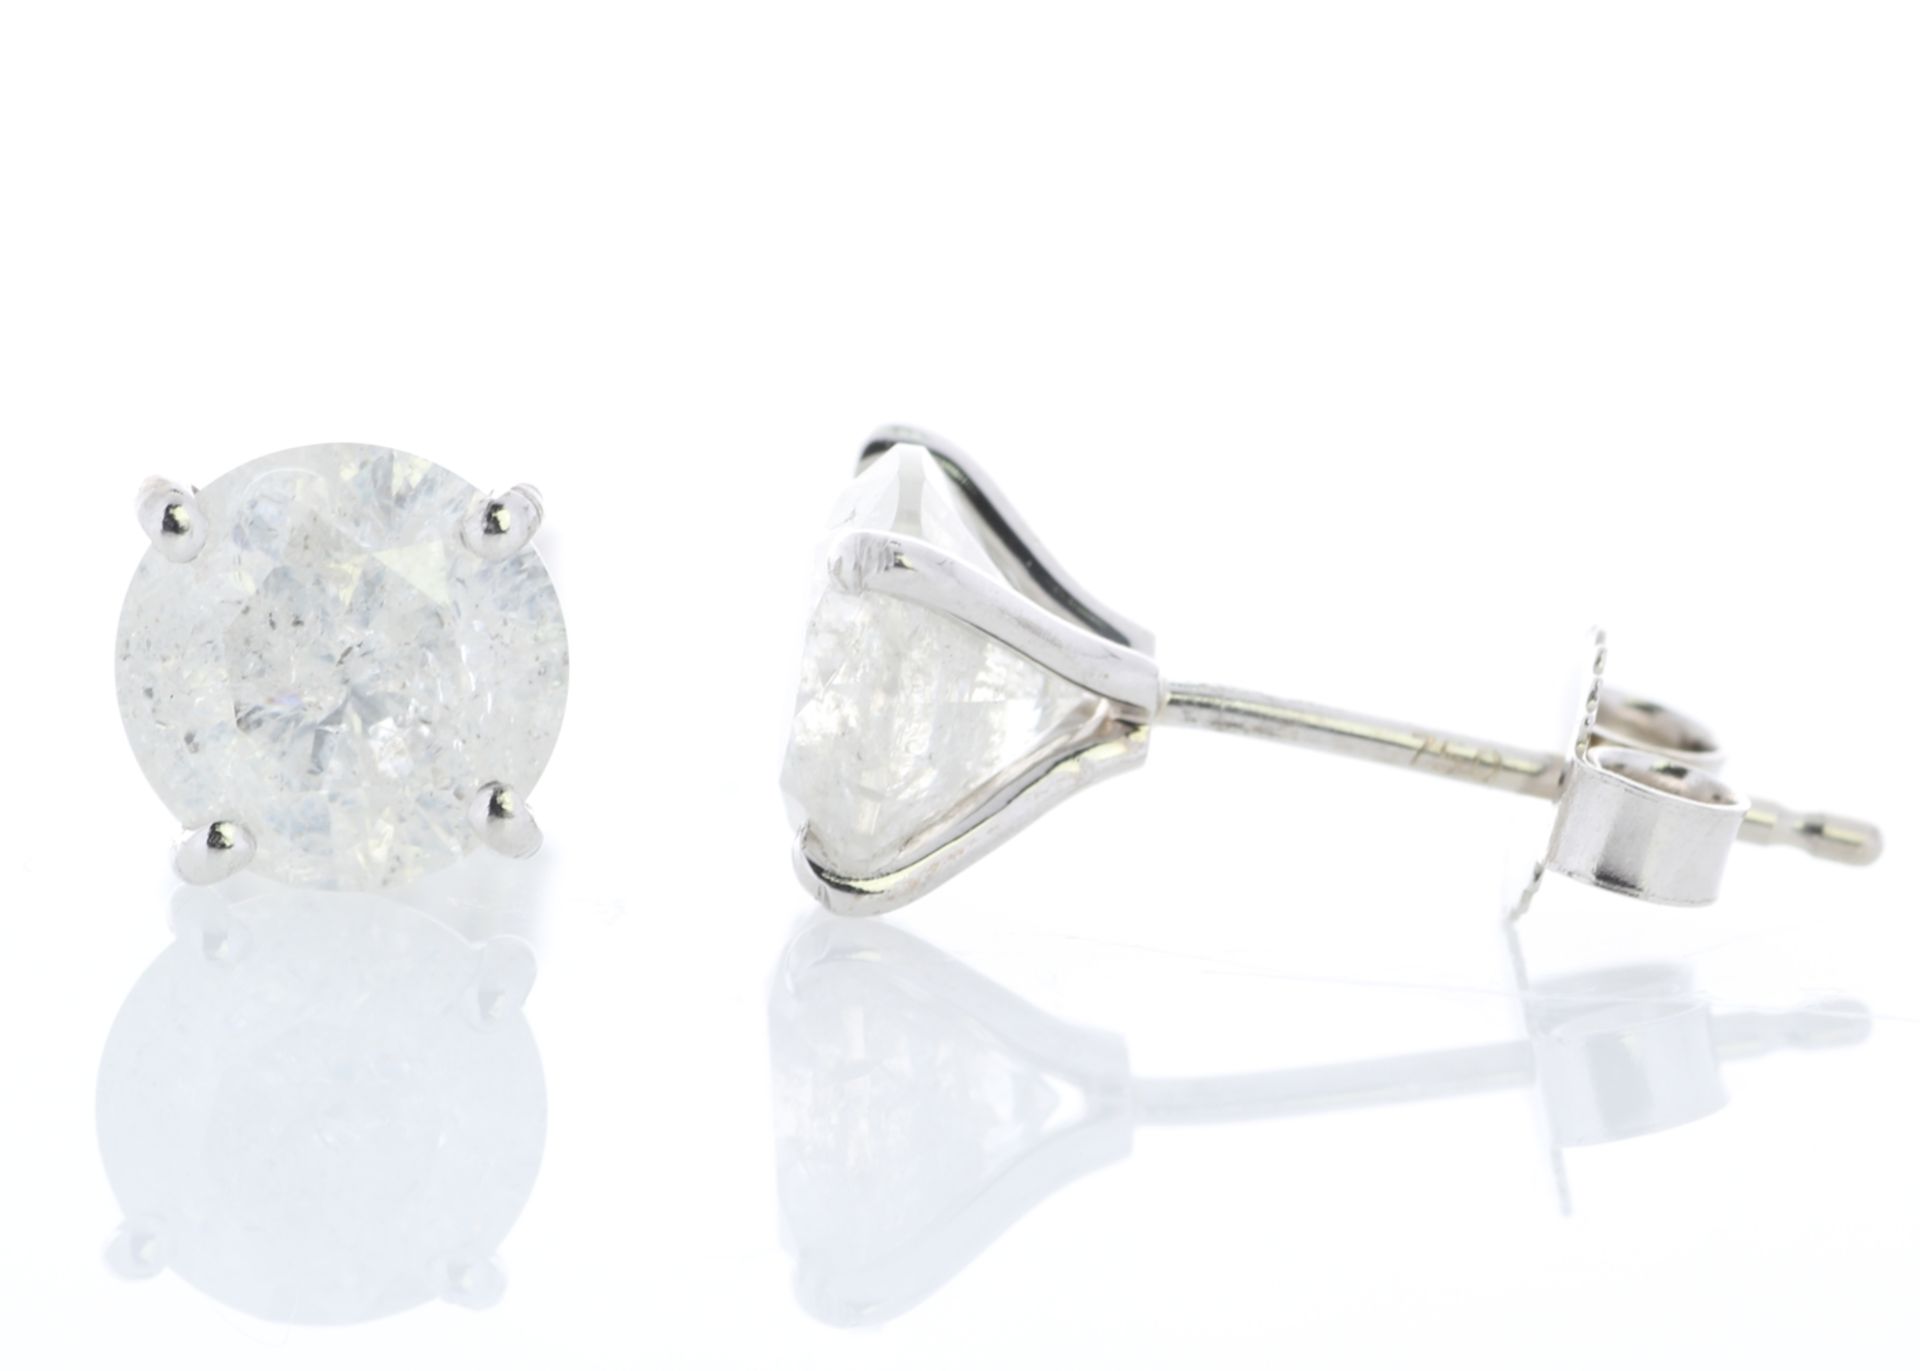 ***£8,679.00*** UNUSED - Certified by GIE 18ct White Gold Single Stone Prong Set Diamond Earring 2. - Image 2 of 3